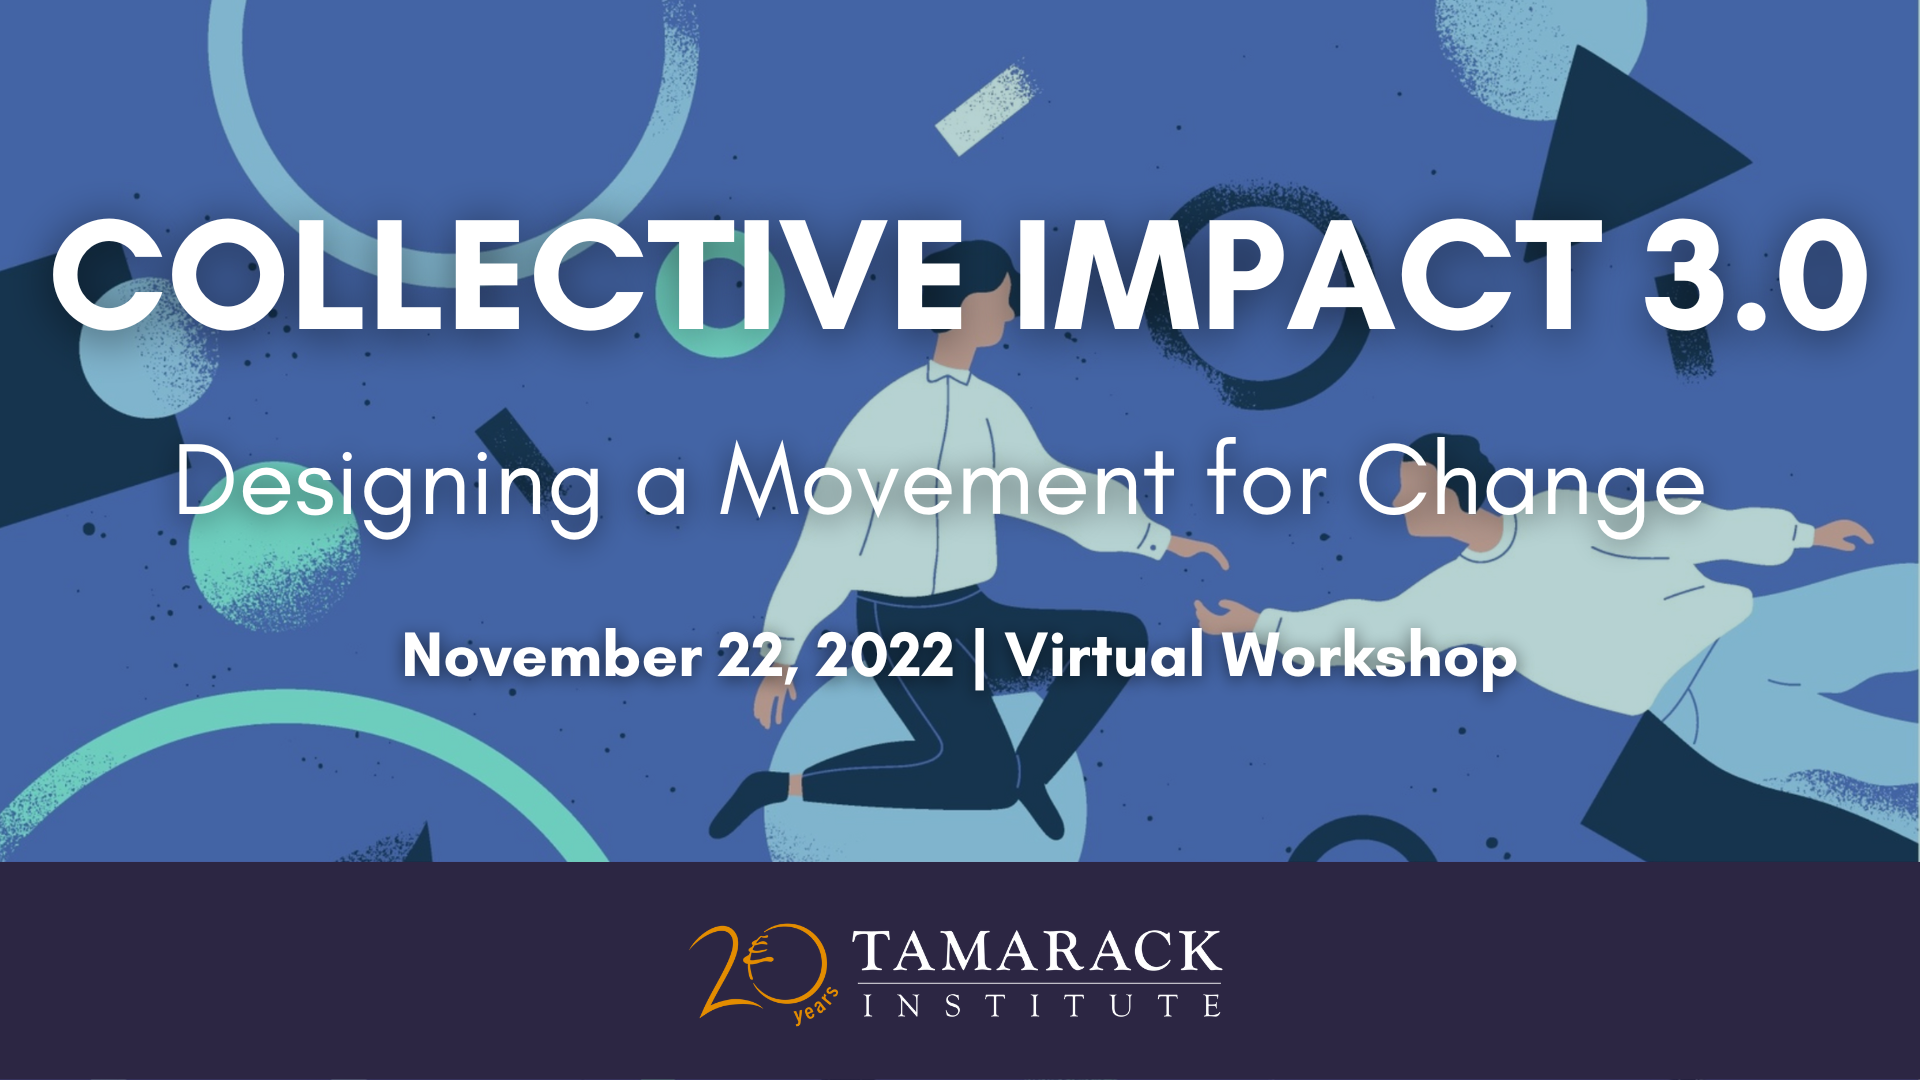 Collective Impact 3.0: Designing a Movement for Change